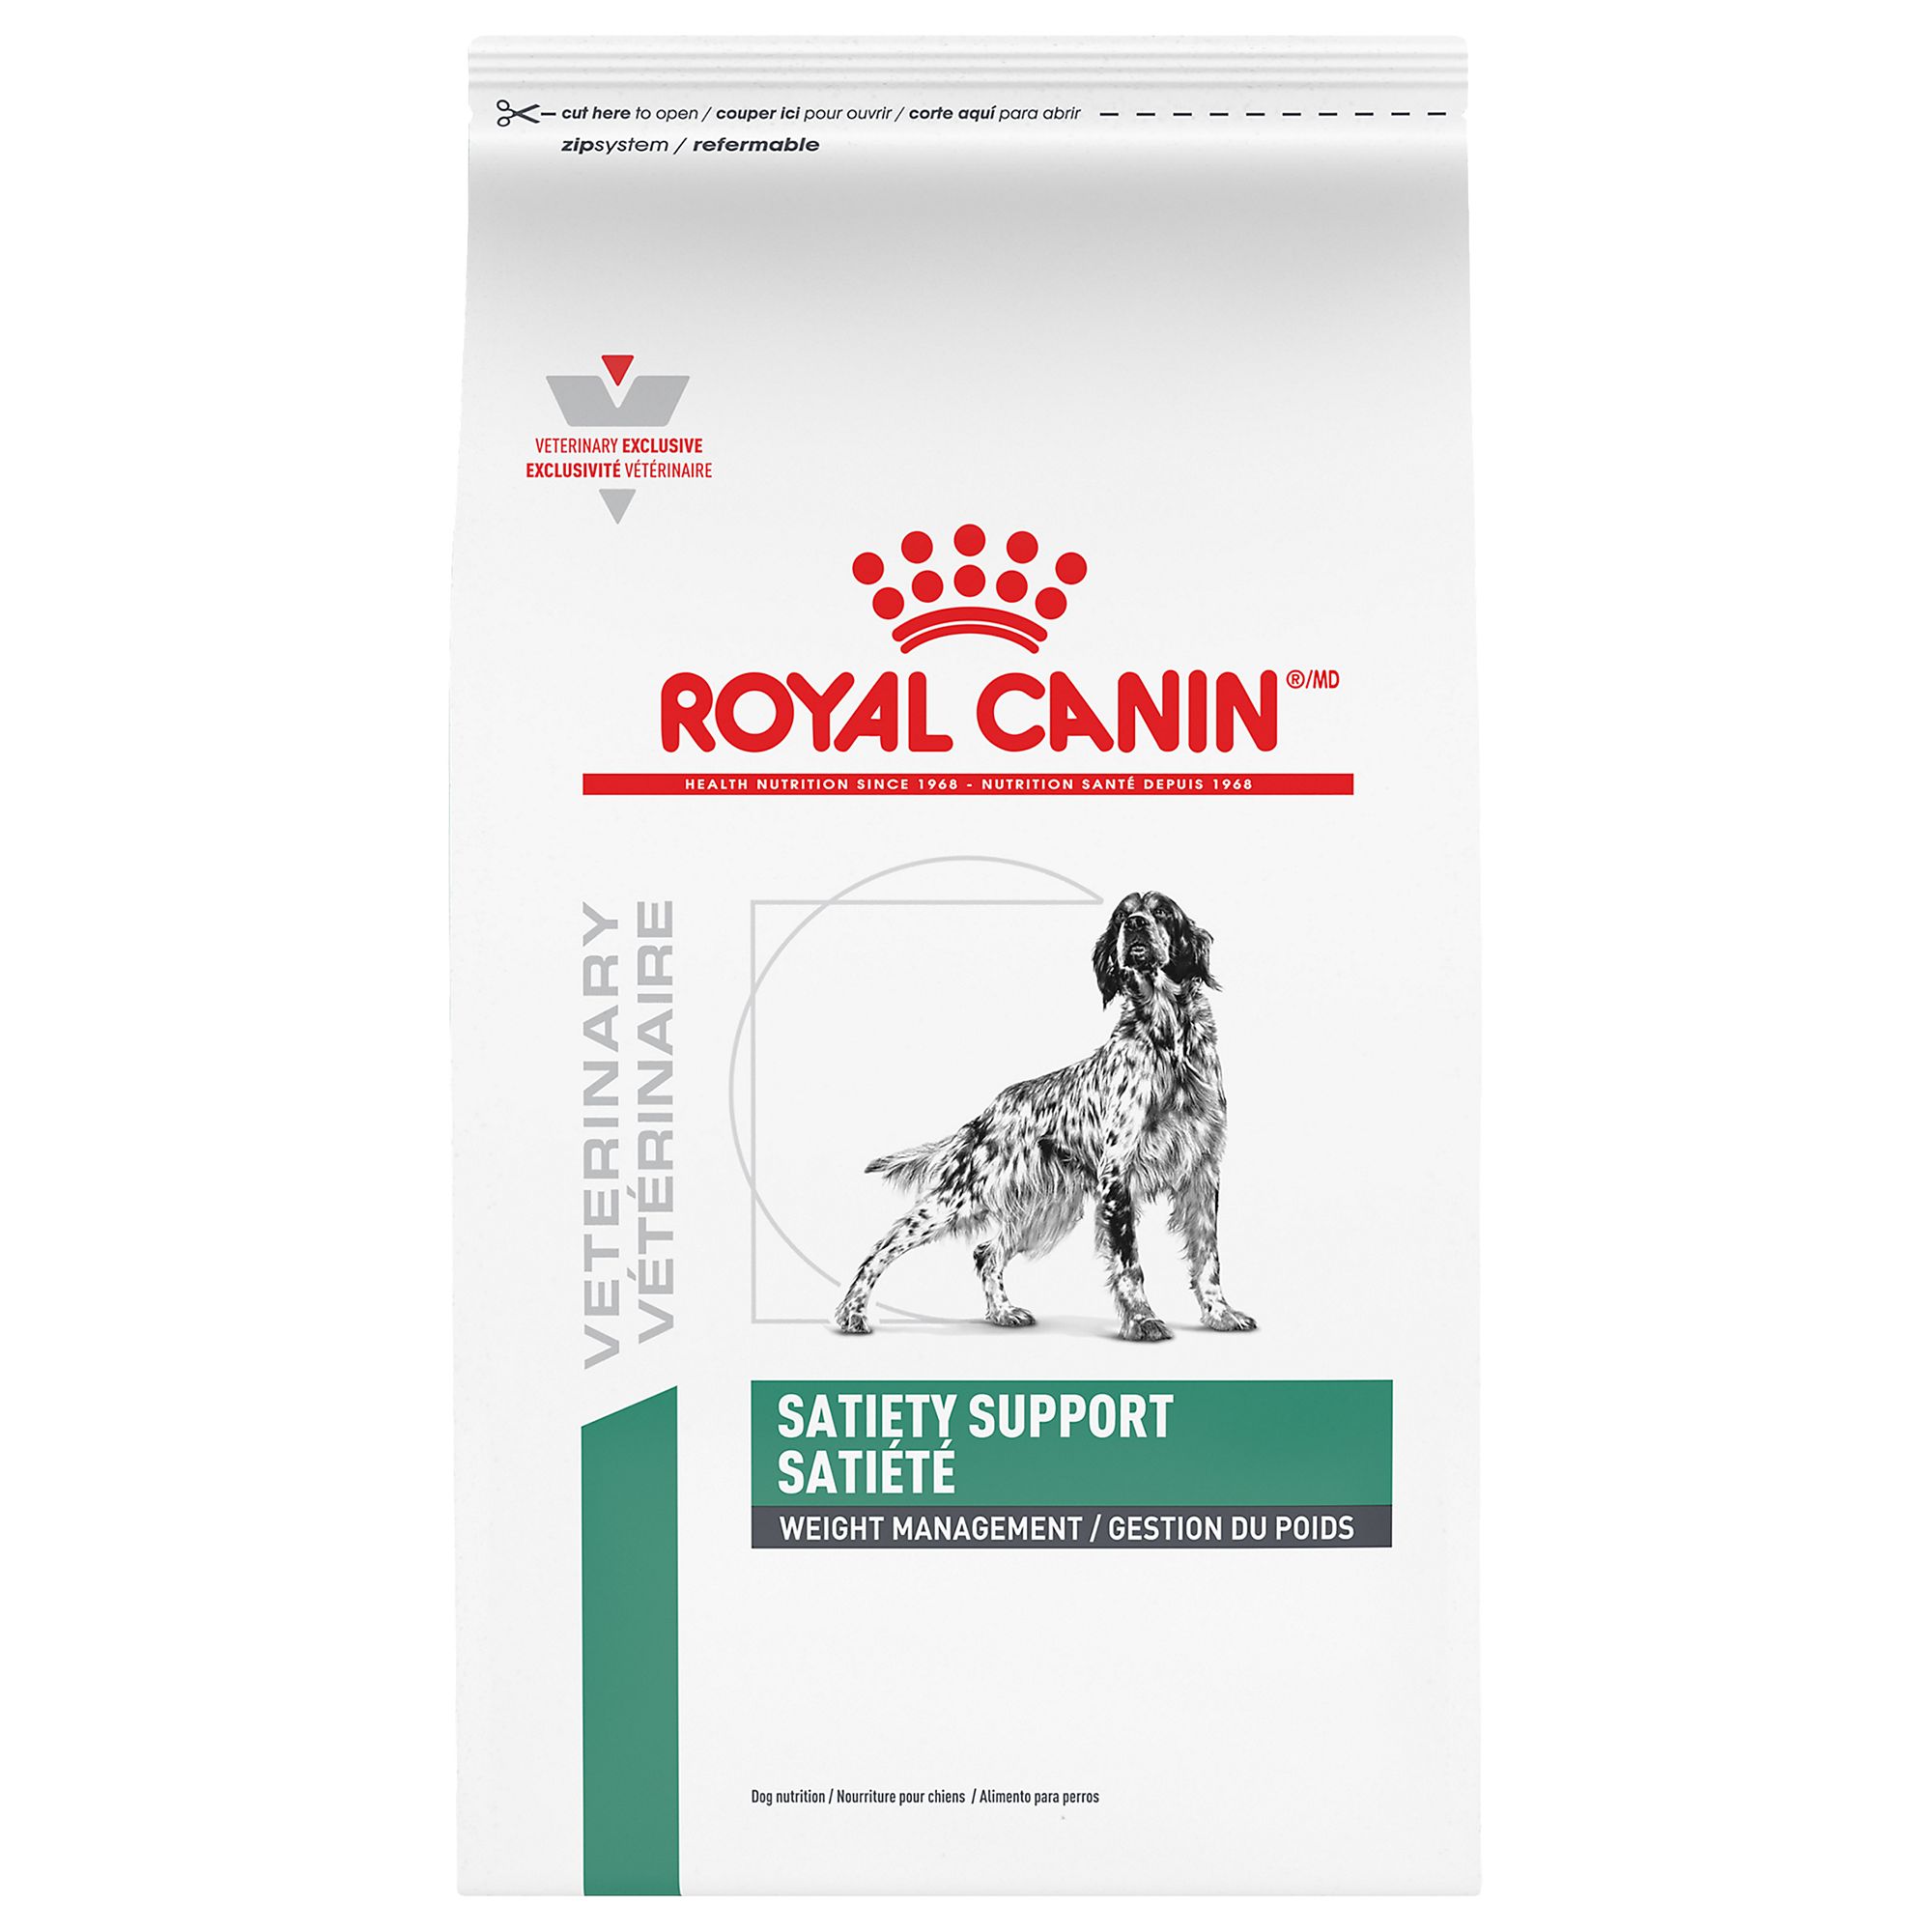 royal canal food for dogs